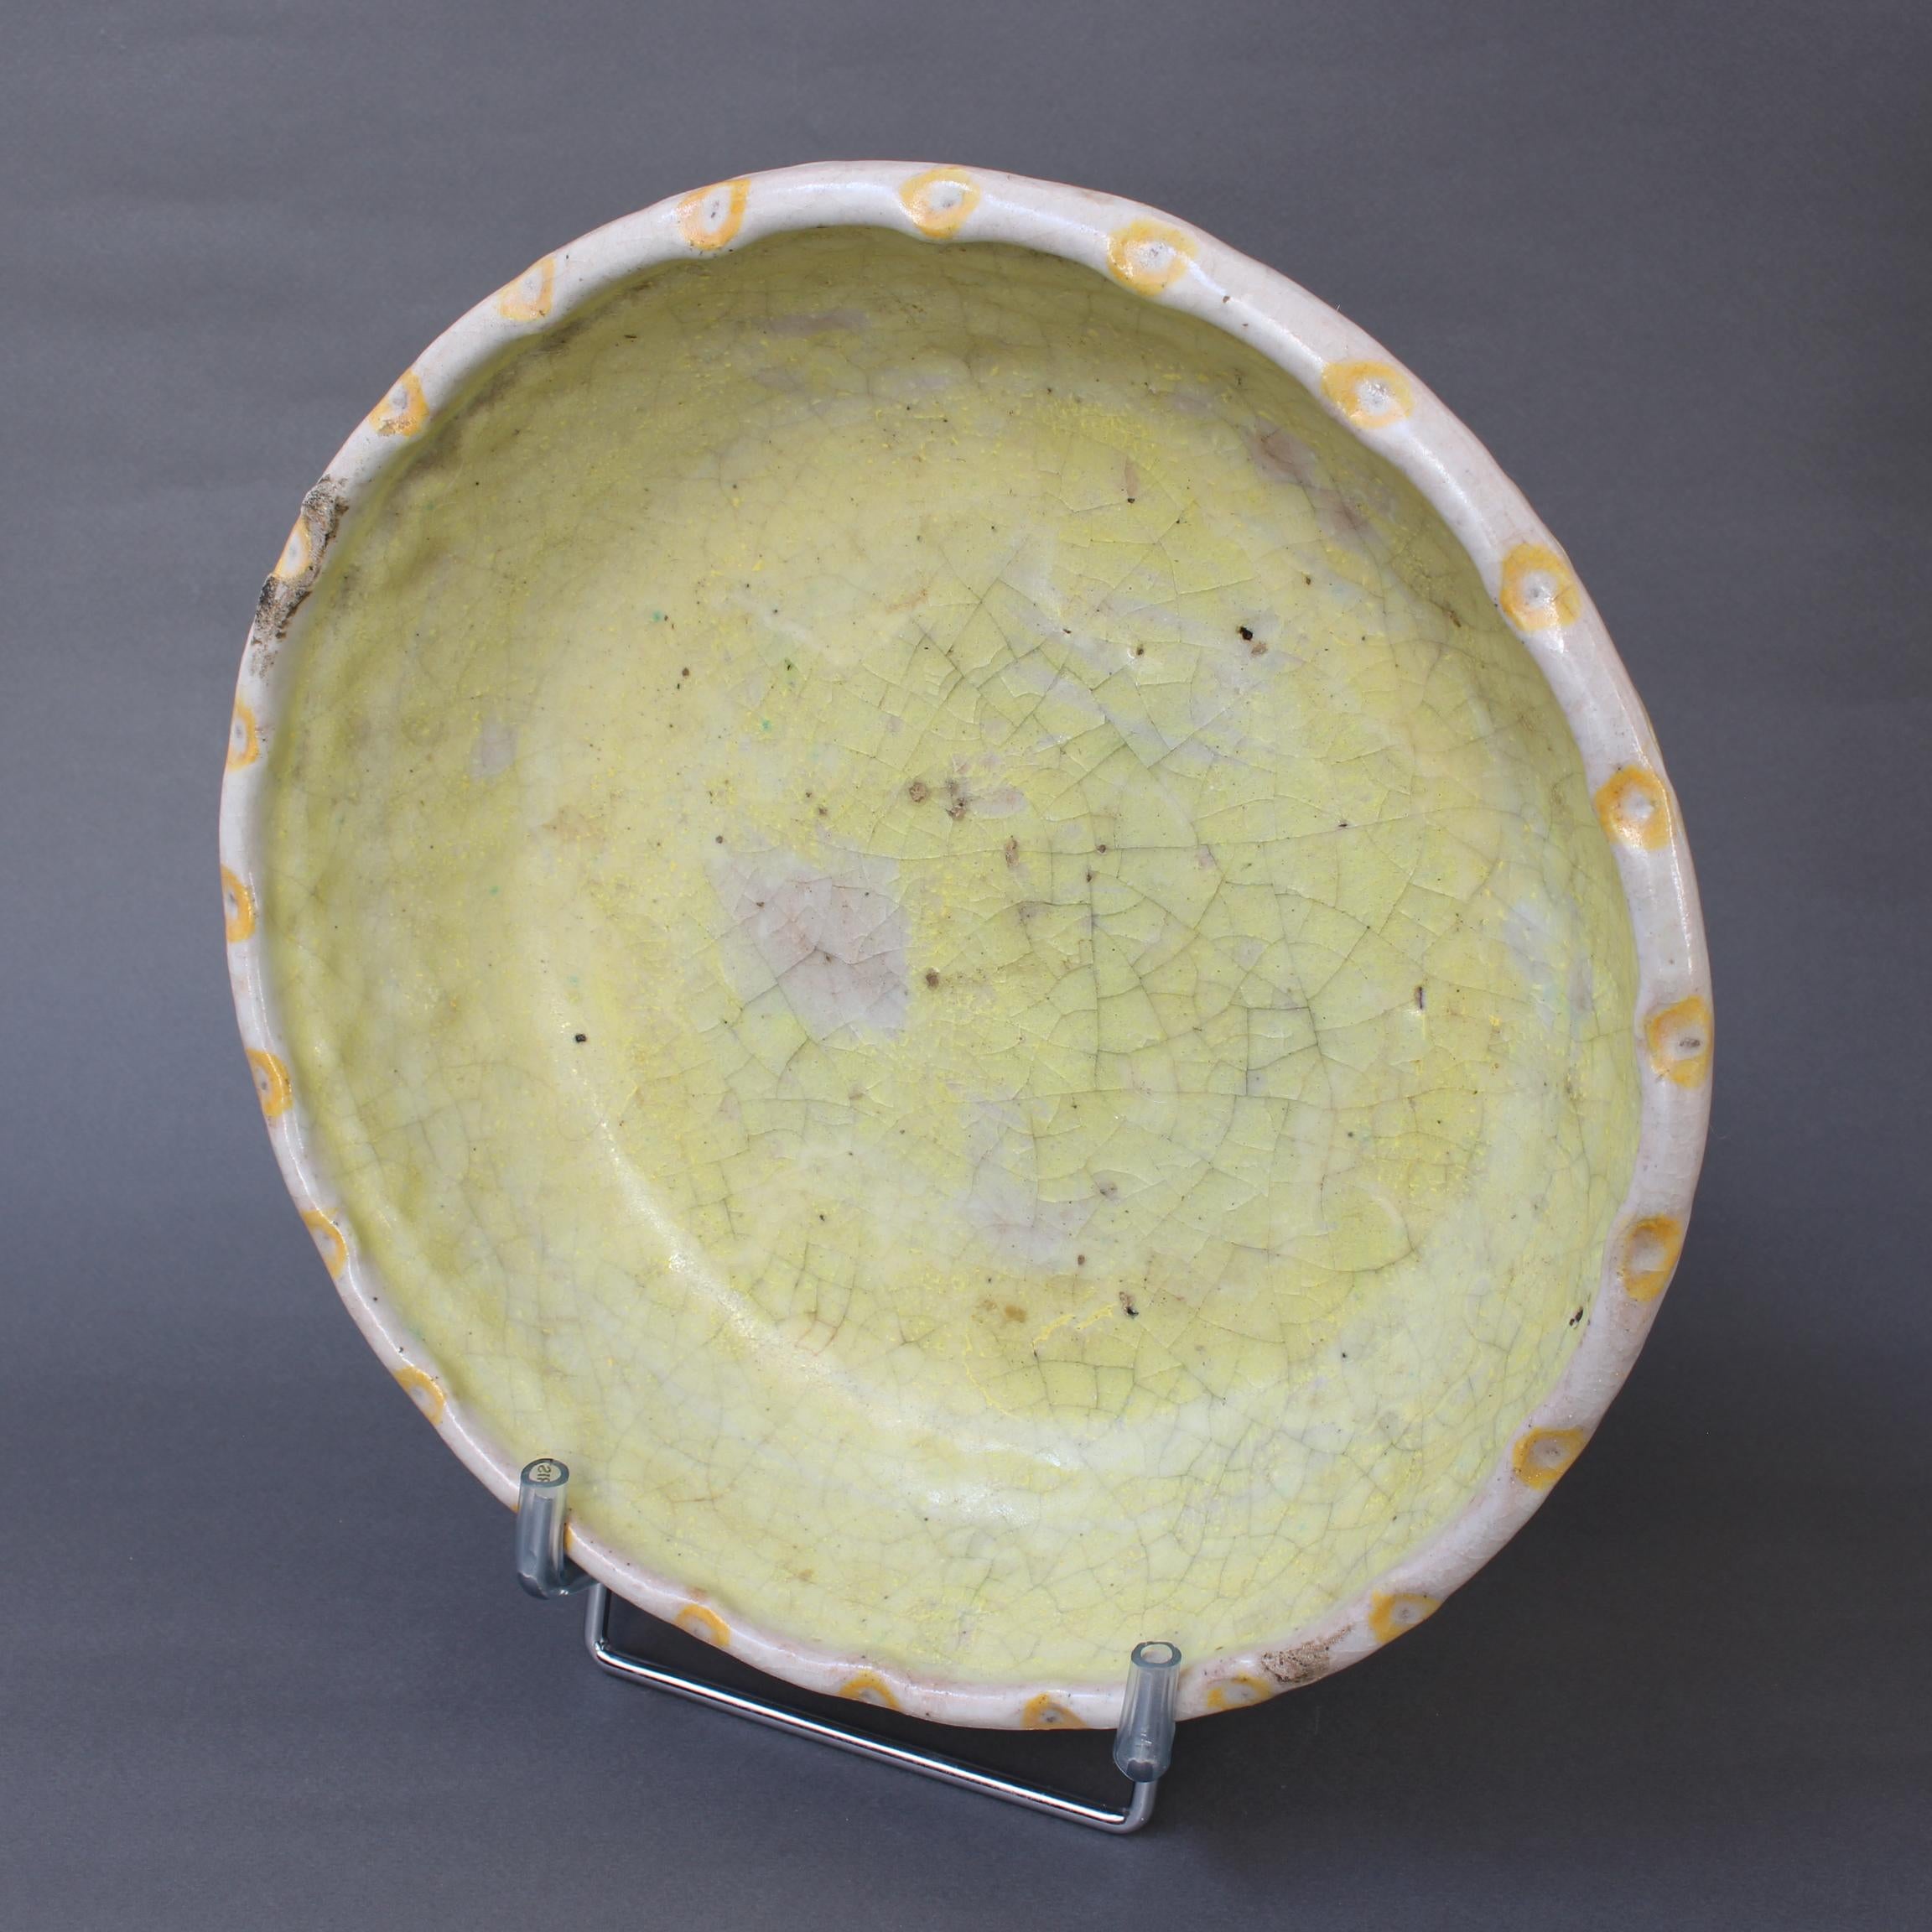 Decorative Italian ceramic fruit bowl by Guido Gambone (circa 1930s). Handmade and painted in a dreamy yellow glaze with crackle effect. The exterior is adorned with dimples below the lighter coloured lip. In fair overall condition commensurate with